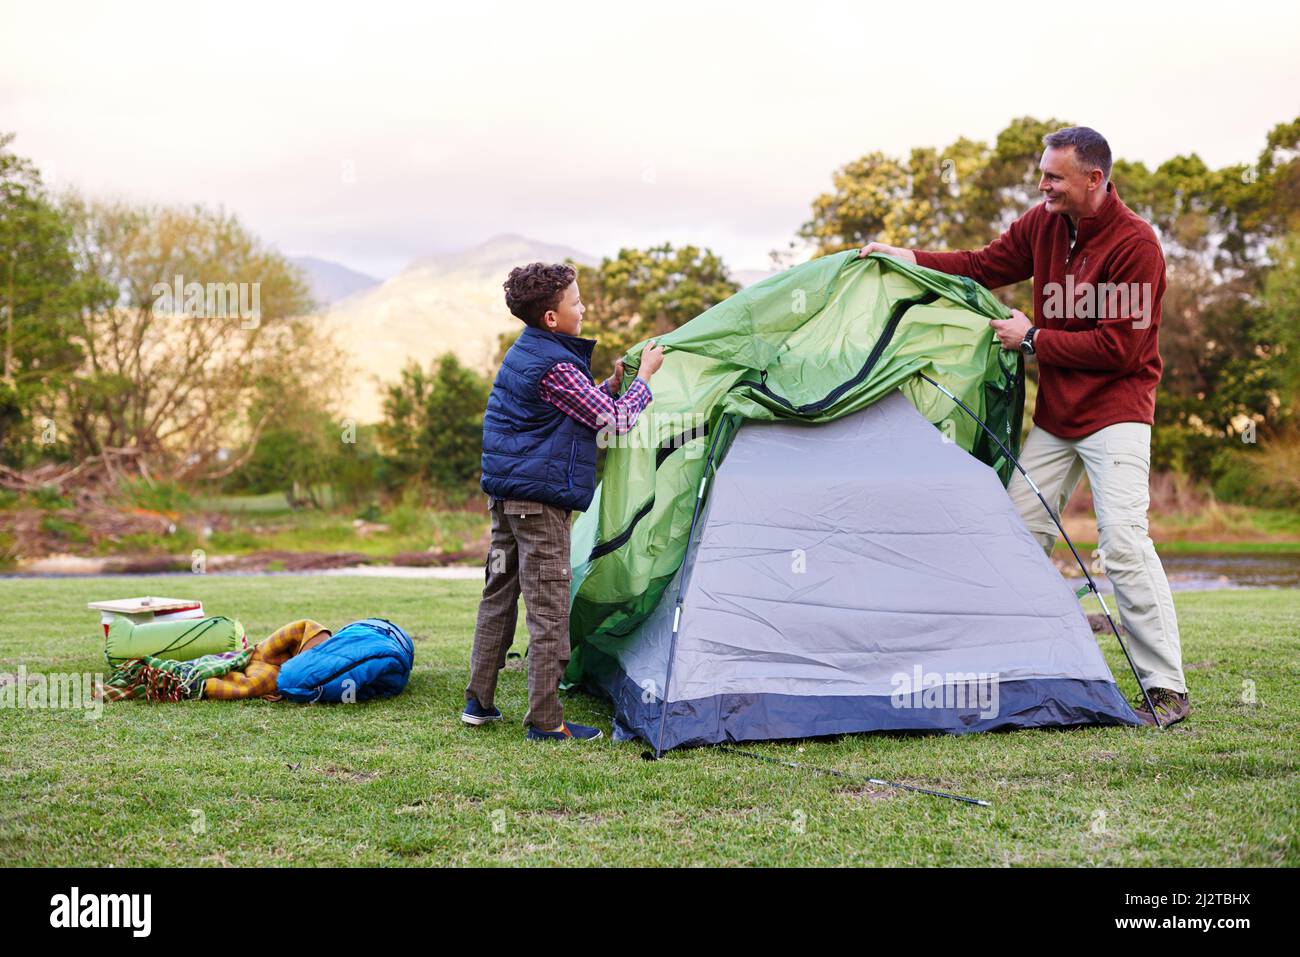 Camp is almost ready. Shot of a father and son setting up a tent together while camping. Stock Photo